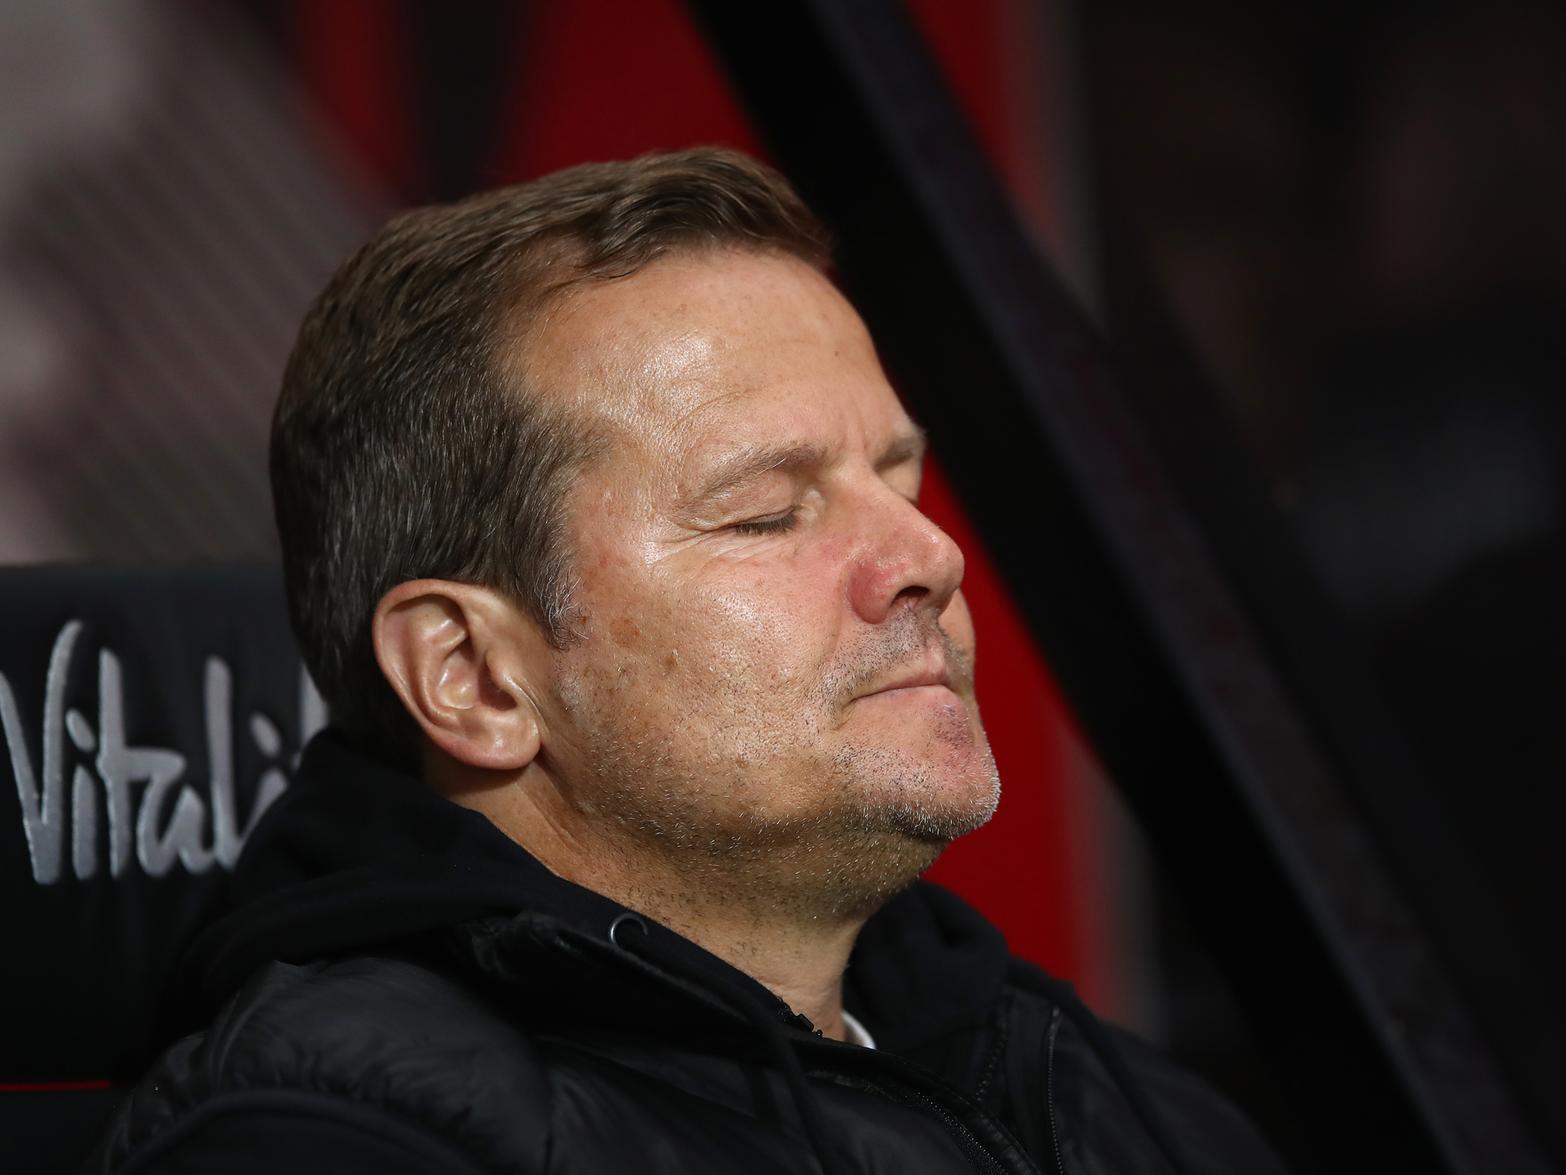 The FA will not investigate Forest Green head coach Mark Cooper after it was alleged he made an "unacceptable" jibe about late Leyton Orient boss Justin Edinburgh. (BBC)